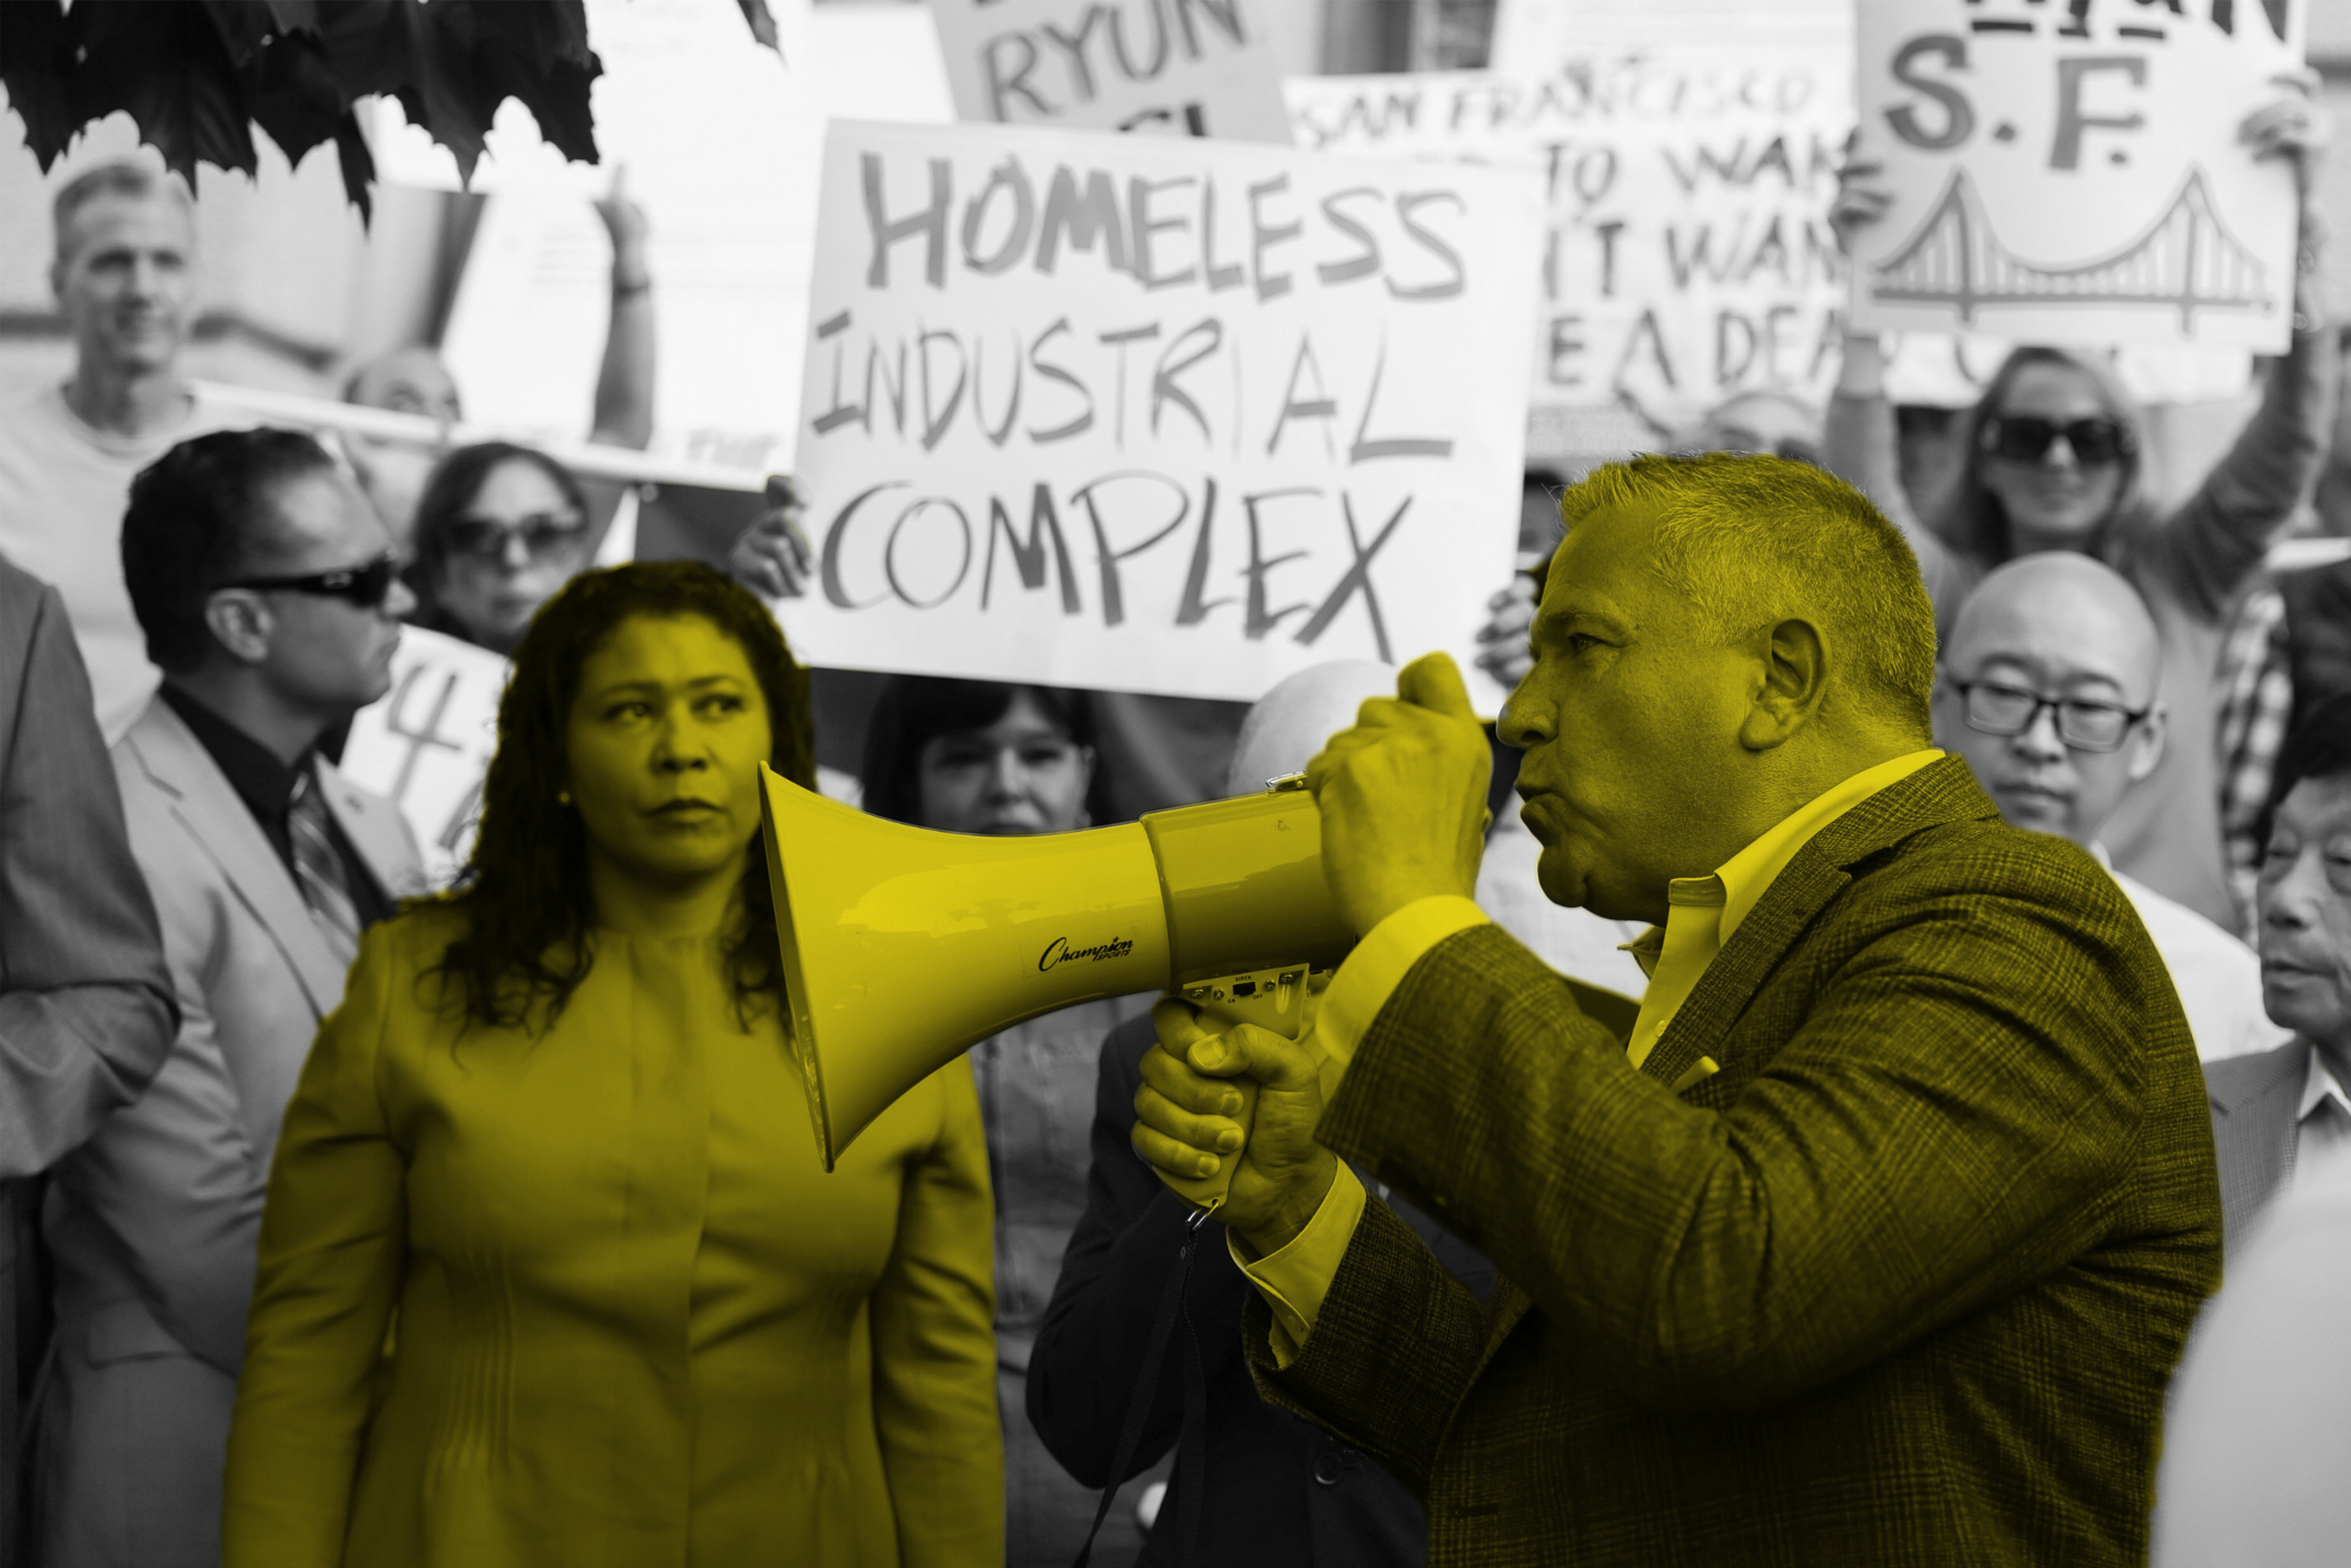 A man in a suit speaks into a yellow megaphone at a protest; black-and-white backdrop with only the megaphone in color.